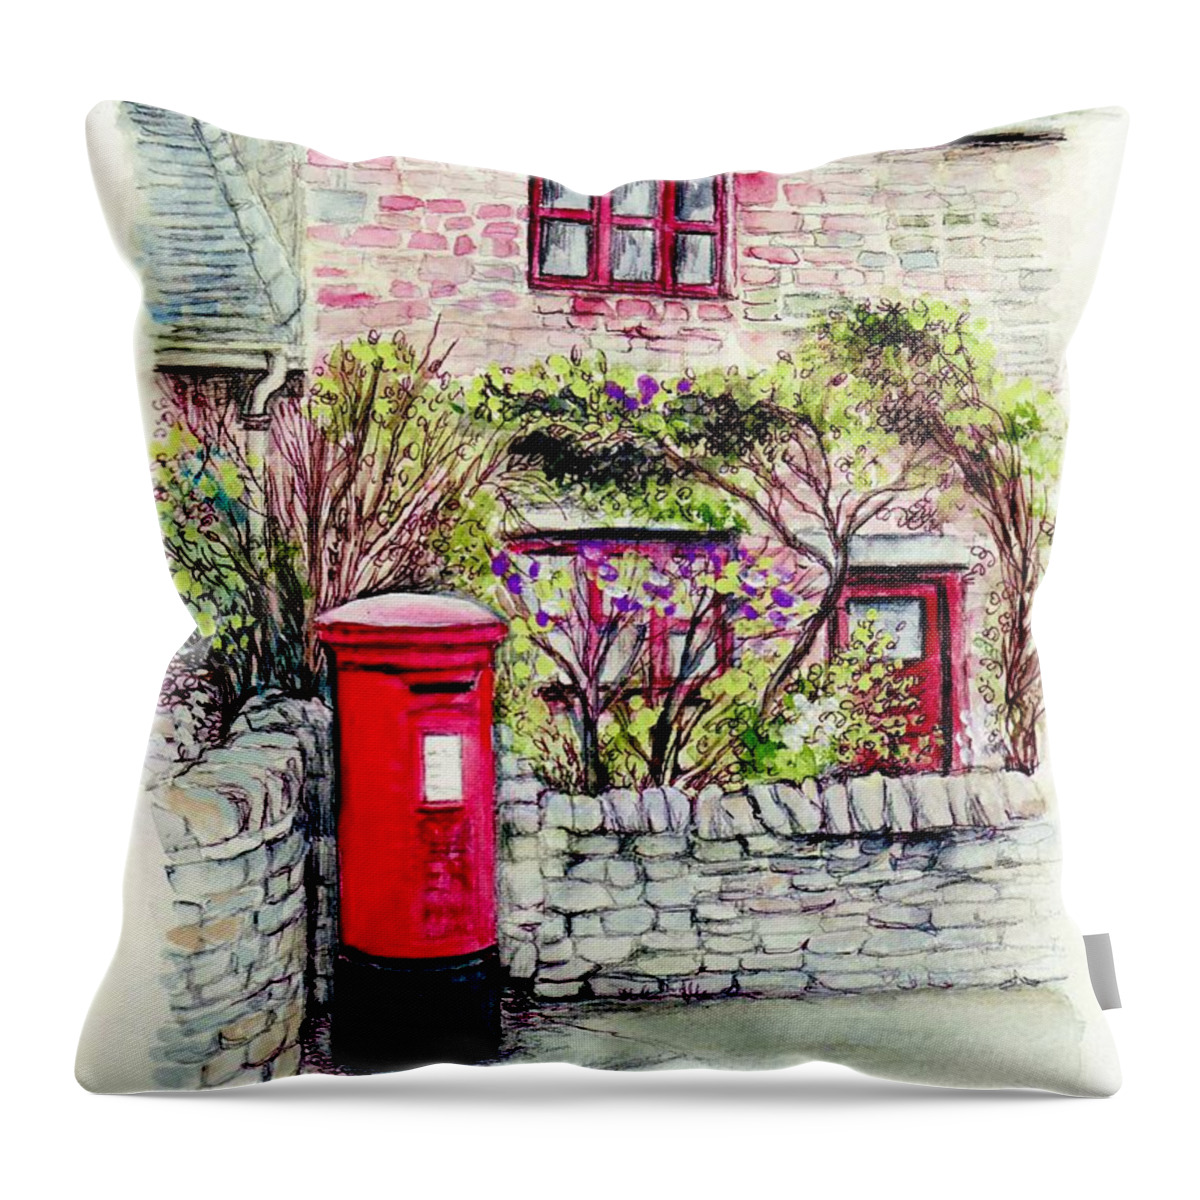 Country Throw Pillow featuring the painting Country Village Post Box by Morgan Fitzsimons